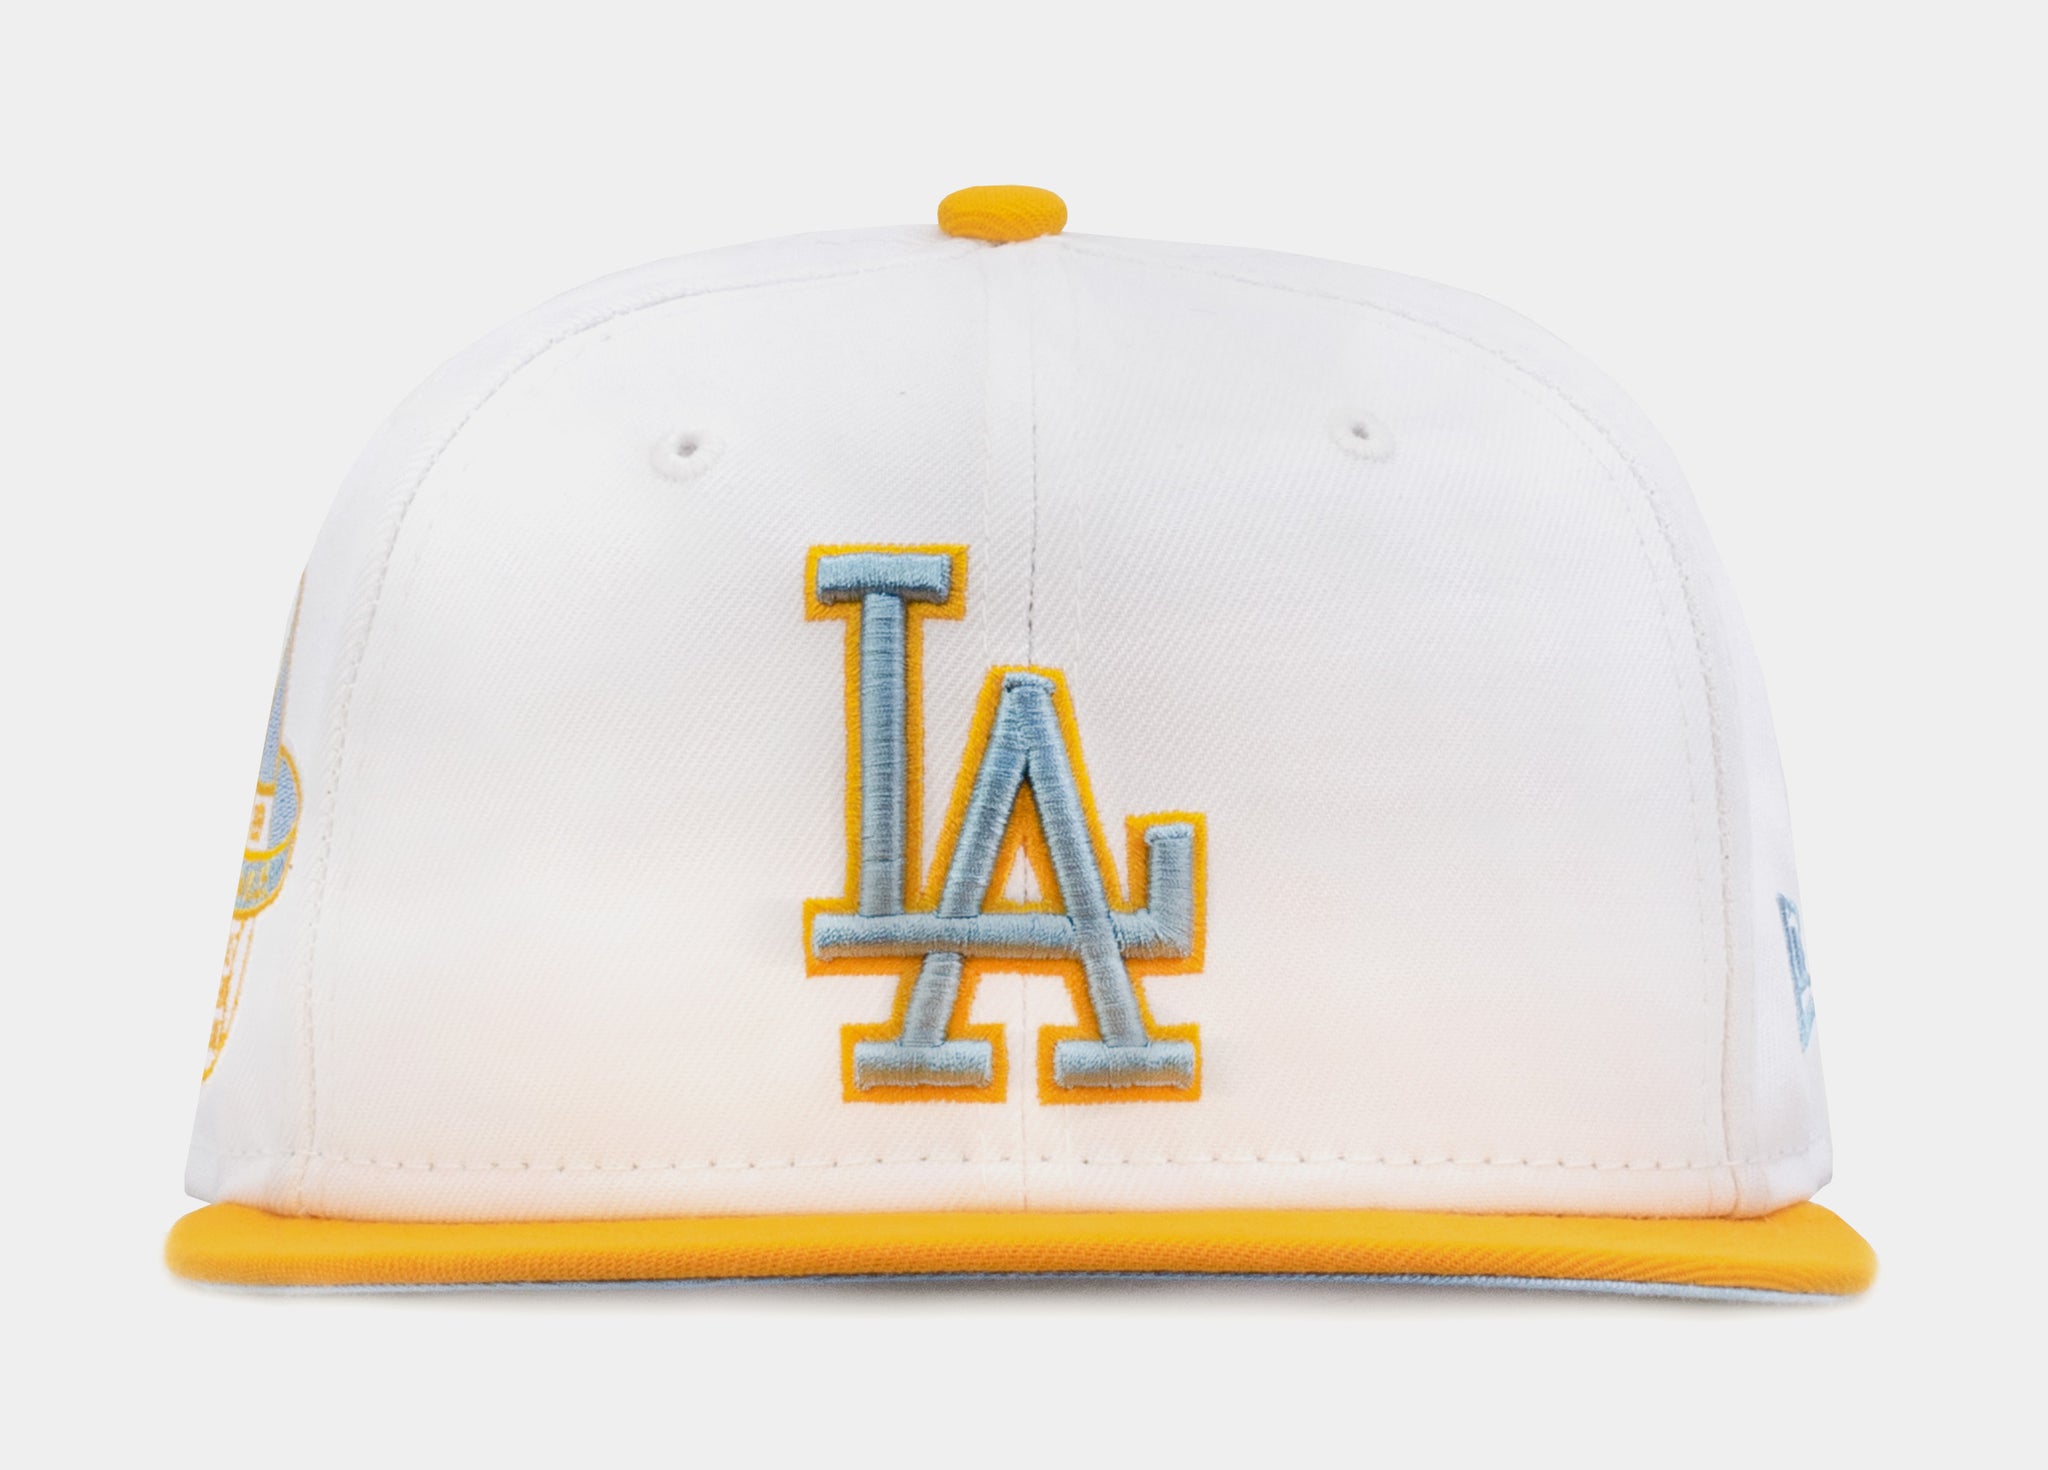 New Era Shoe Palace Collection Los Angeles Dodgers 59FIFTY Mens Fitted Hat (White/Blue)